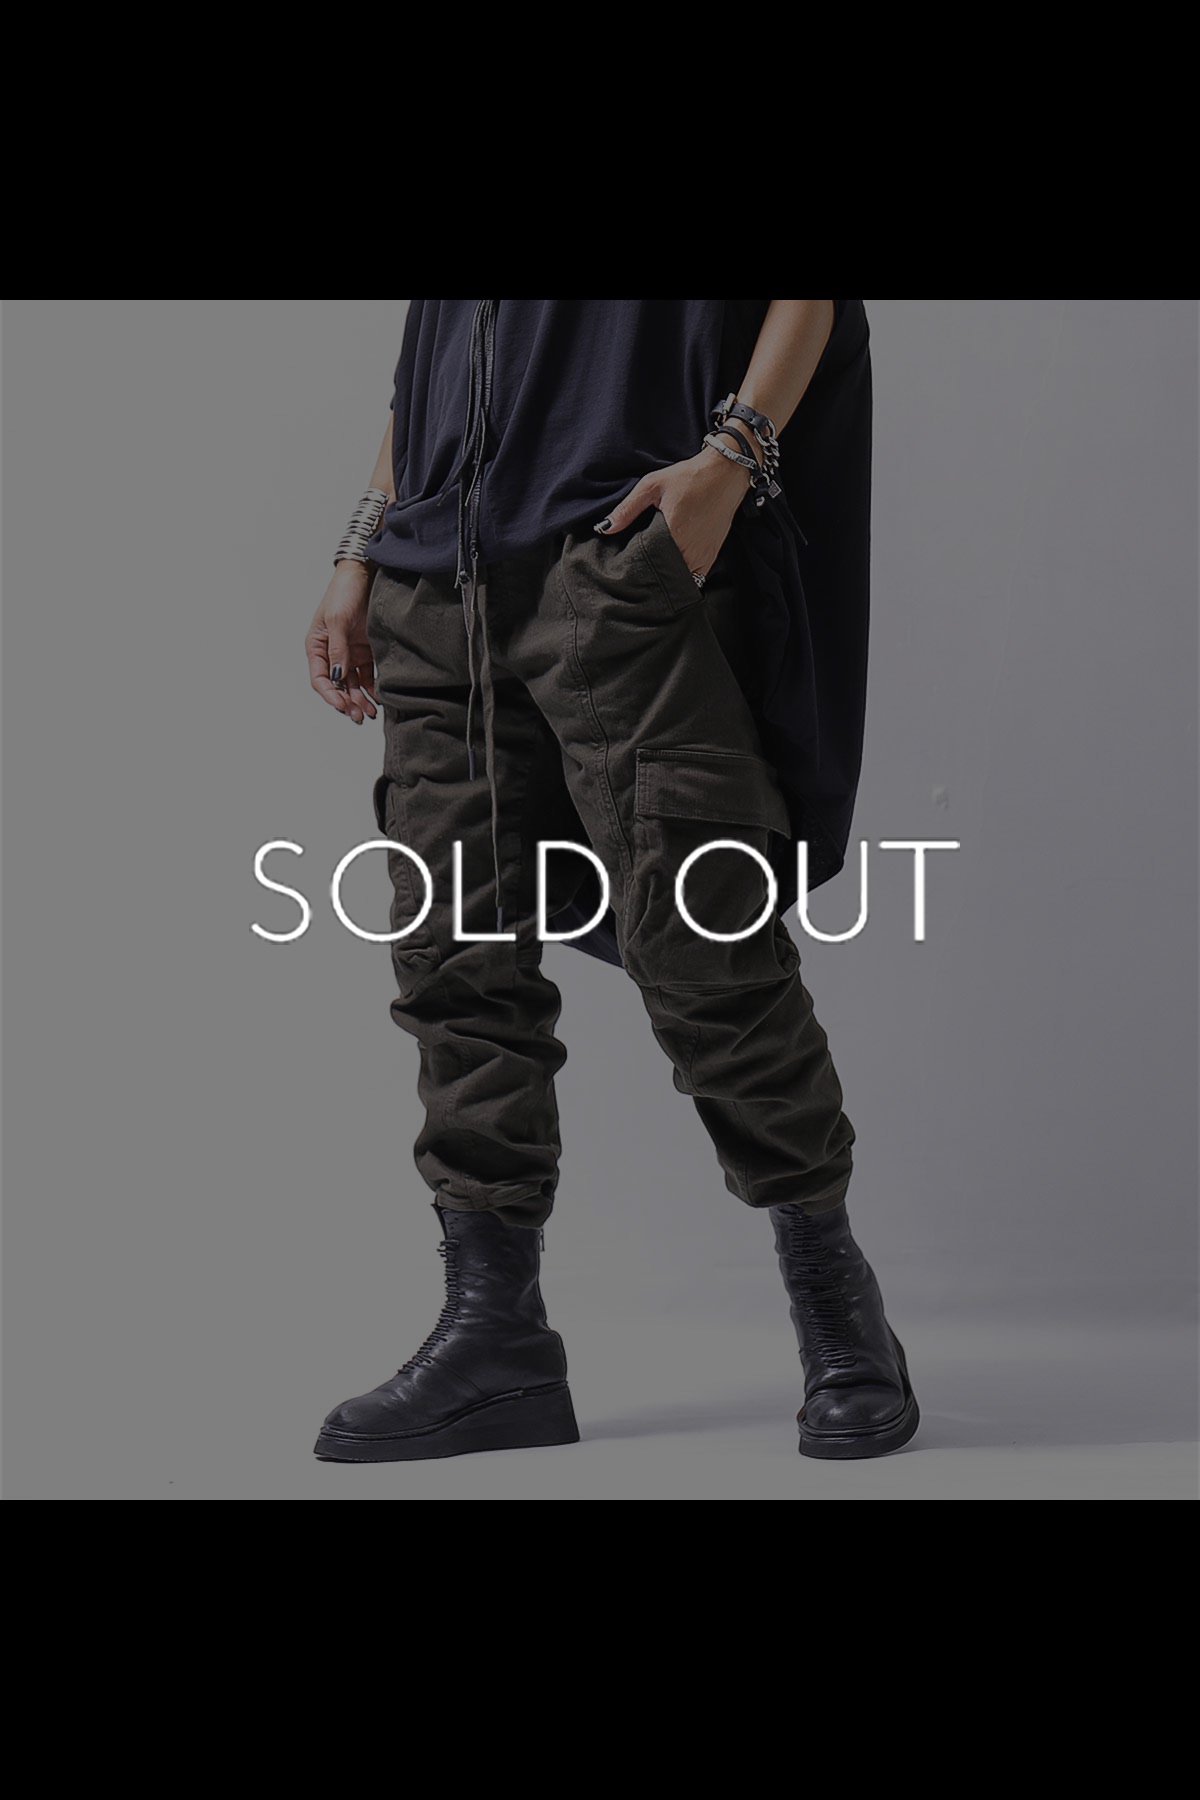 <img class='new_mark_img1' src='https://img.shop-pro.jp/img/new/icons8.gif' style='border:none;display:inline;margin:0px;padding:0px;width:auto;' />UNISEX DENIM CARGO PANTS DEN60_OLIVE MILITARY